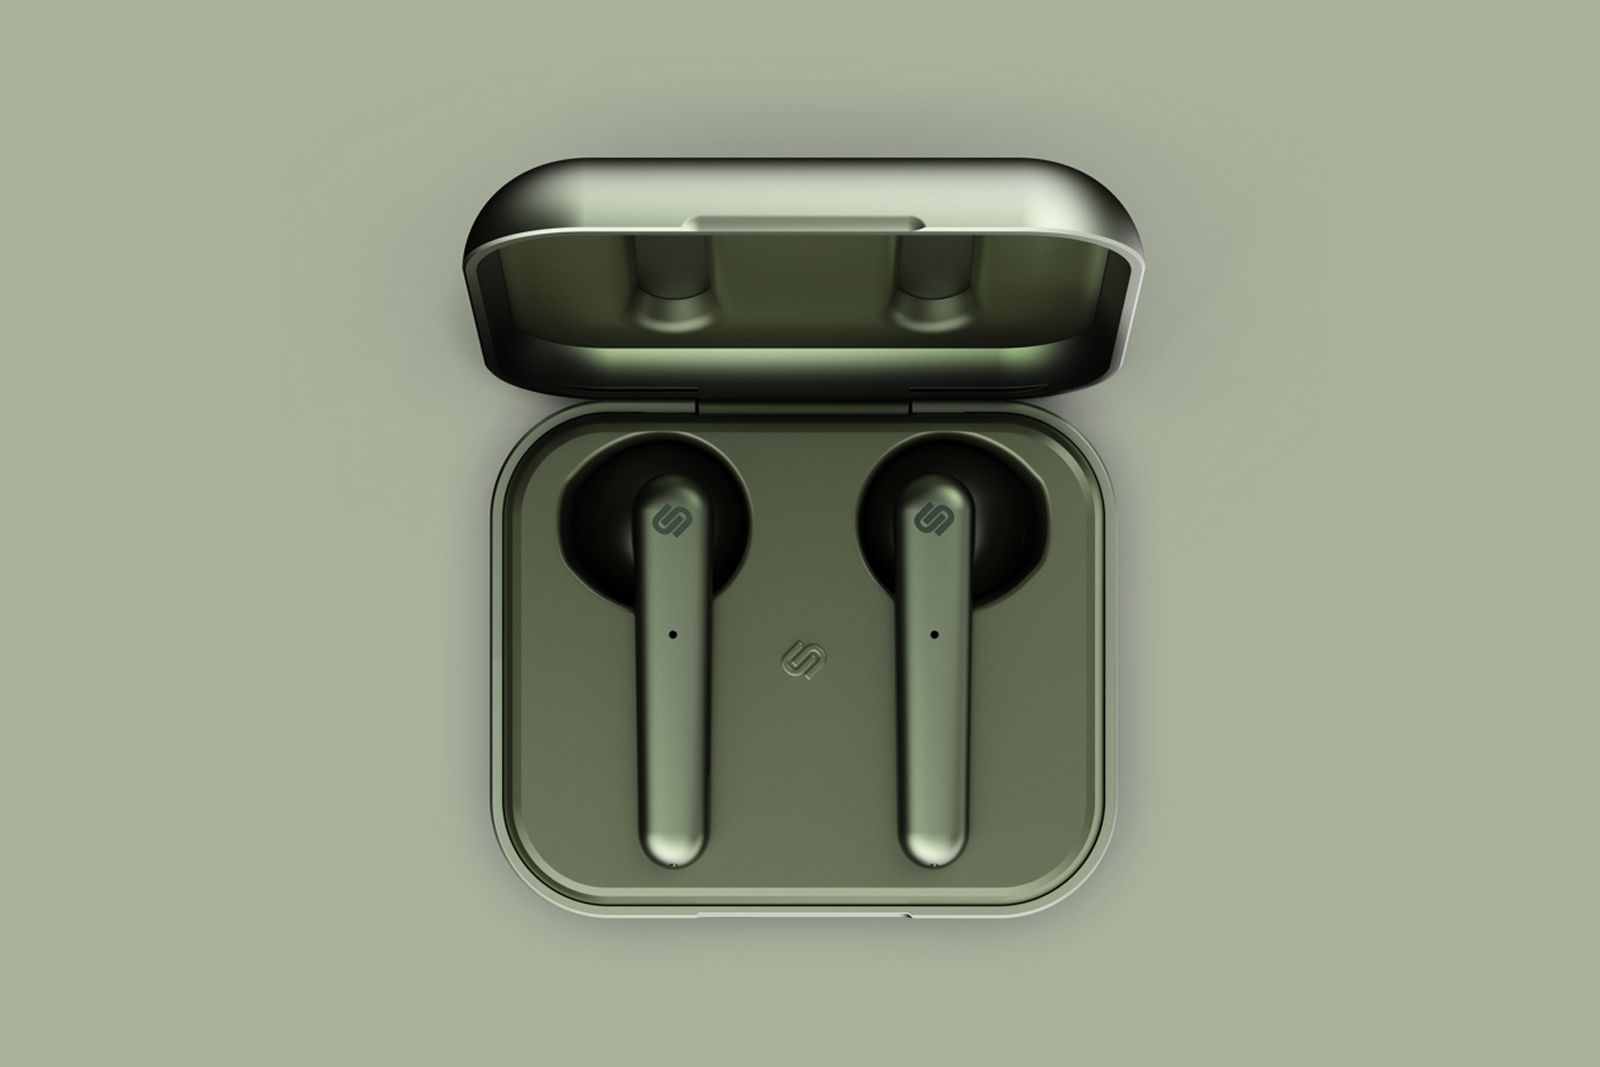 Urbanista Stockholm Wireless Earpods Look Just Like Airpods But They Cost £89 image 2